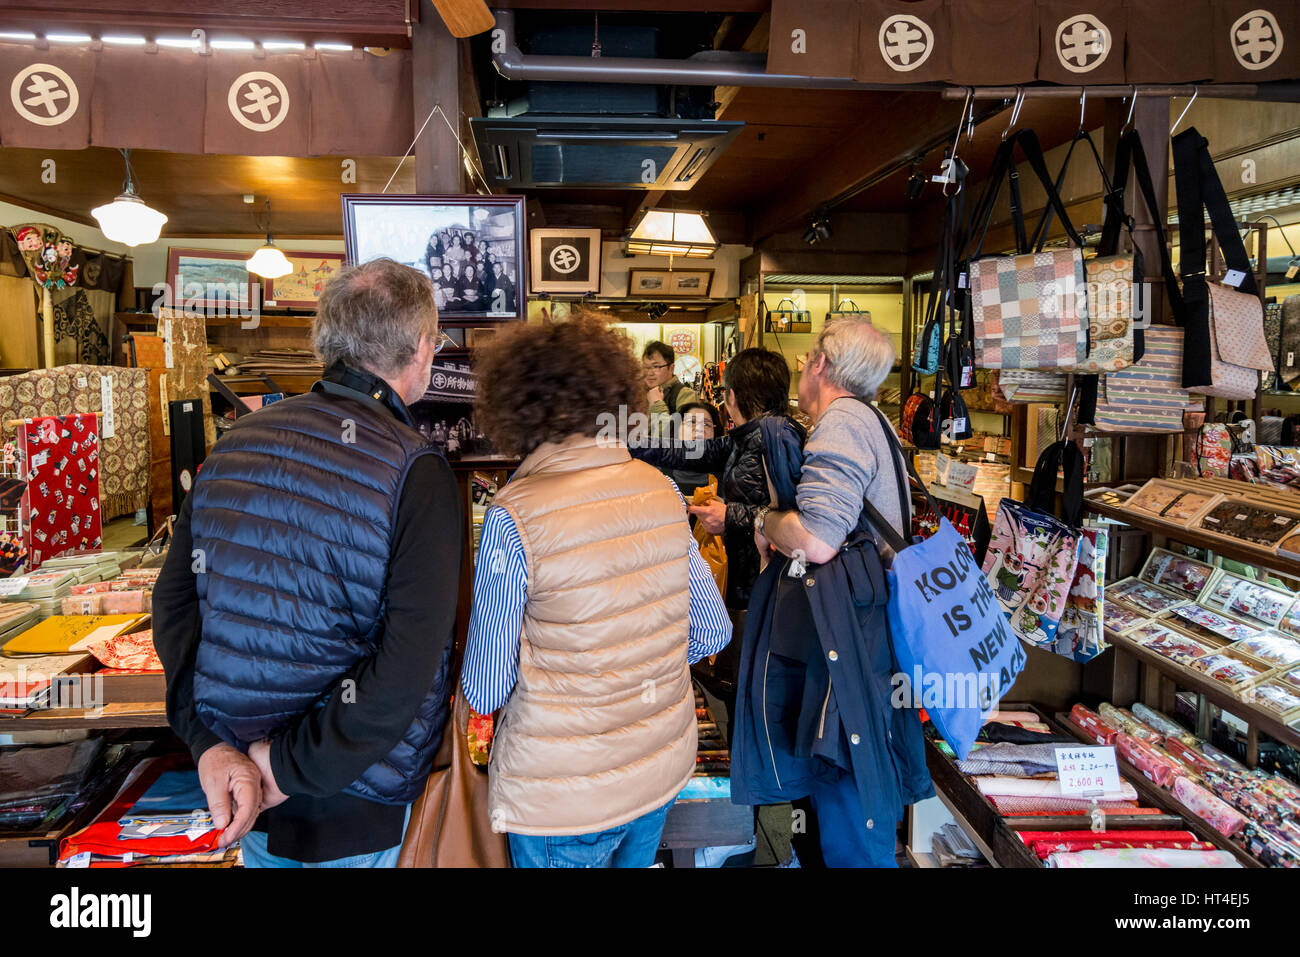 Shoppers, tourists in a souvenir shop selling Japanese artefacts, Kyoto, Japan Stock Photo